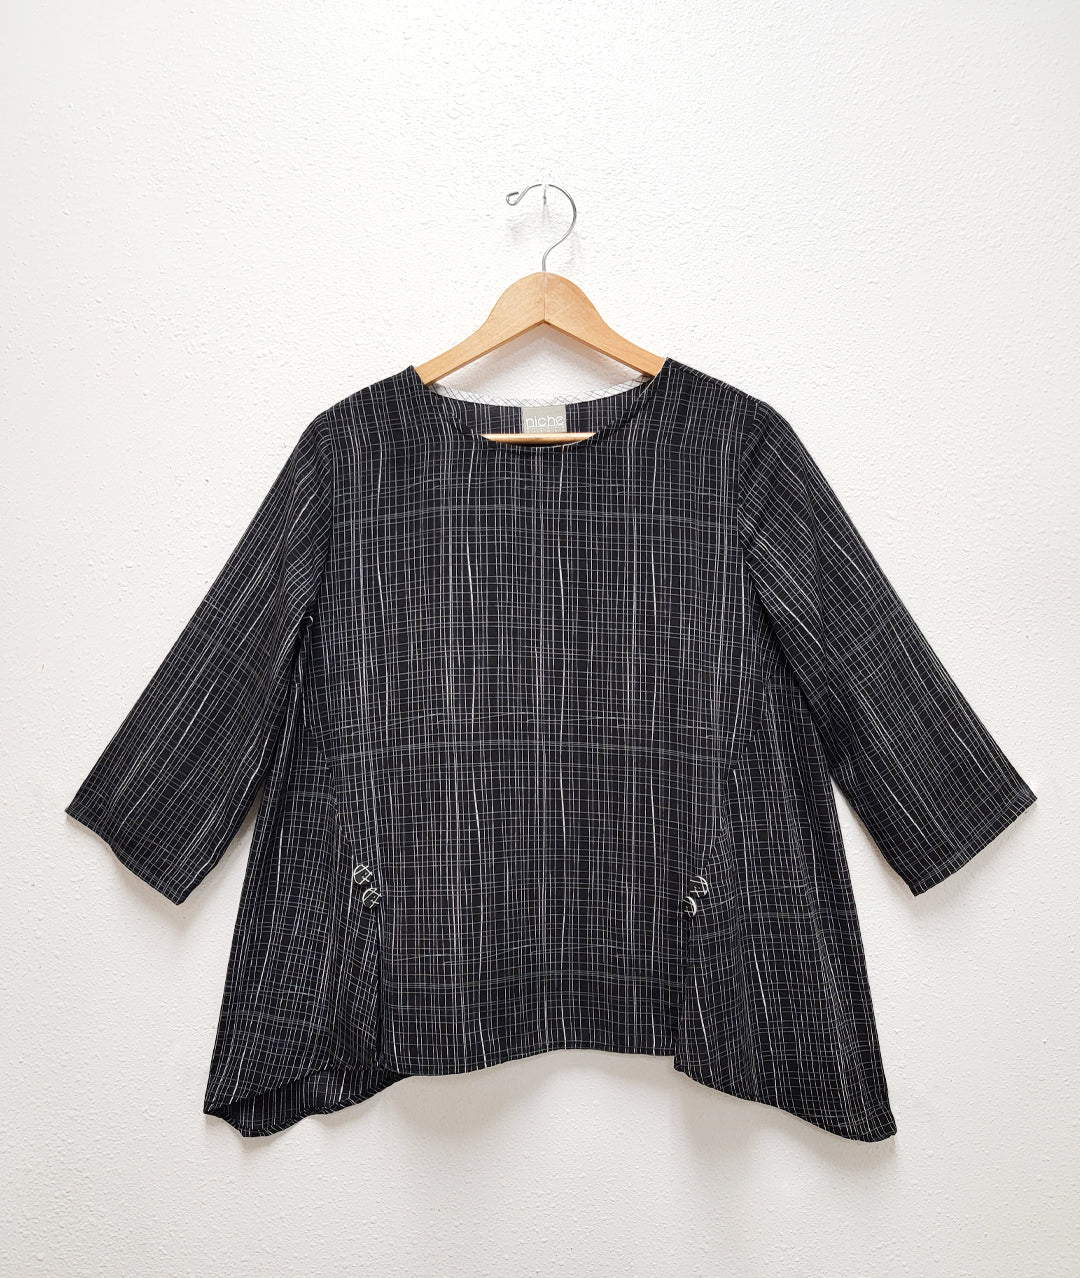 a black pullover top with a white grid print. top has 3/4 sleeves, godets extending from the sides towards the center front, with a split at each seam topped with a button detail